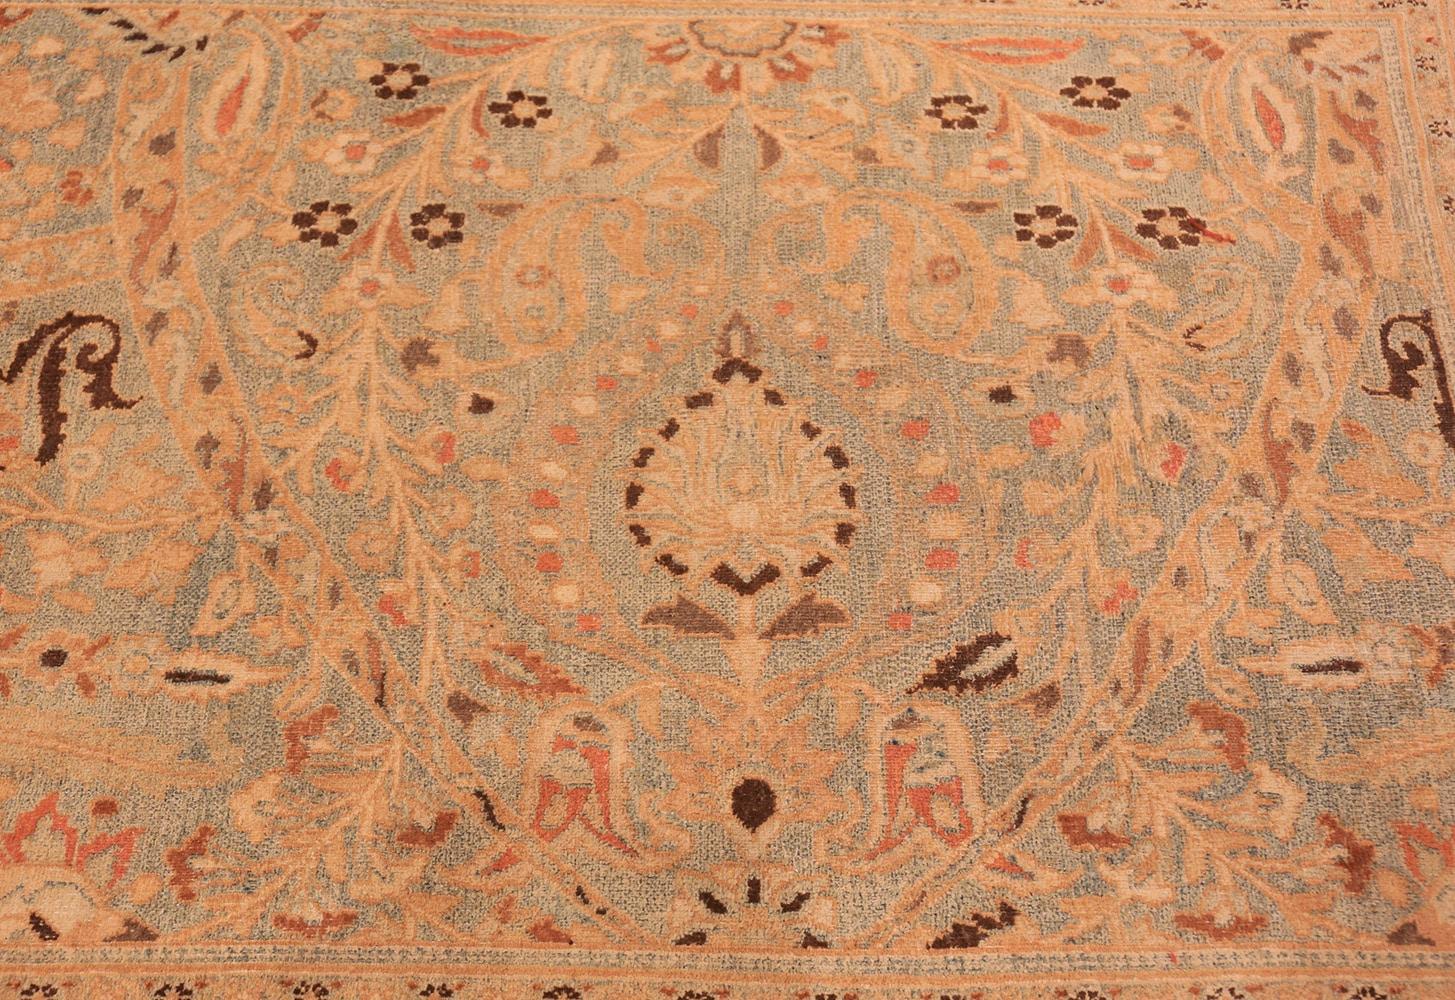 Light blue background antique Khorassan Persian runner rug, country of origin: Persia, date circa 1920. Size: 3 ft 10 in x 14 ft 6 in (1.17 m x 4.42 m)

 Antique Persian Khorasan carpets are known for their soft, delicate designs that are